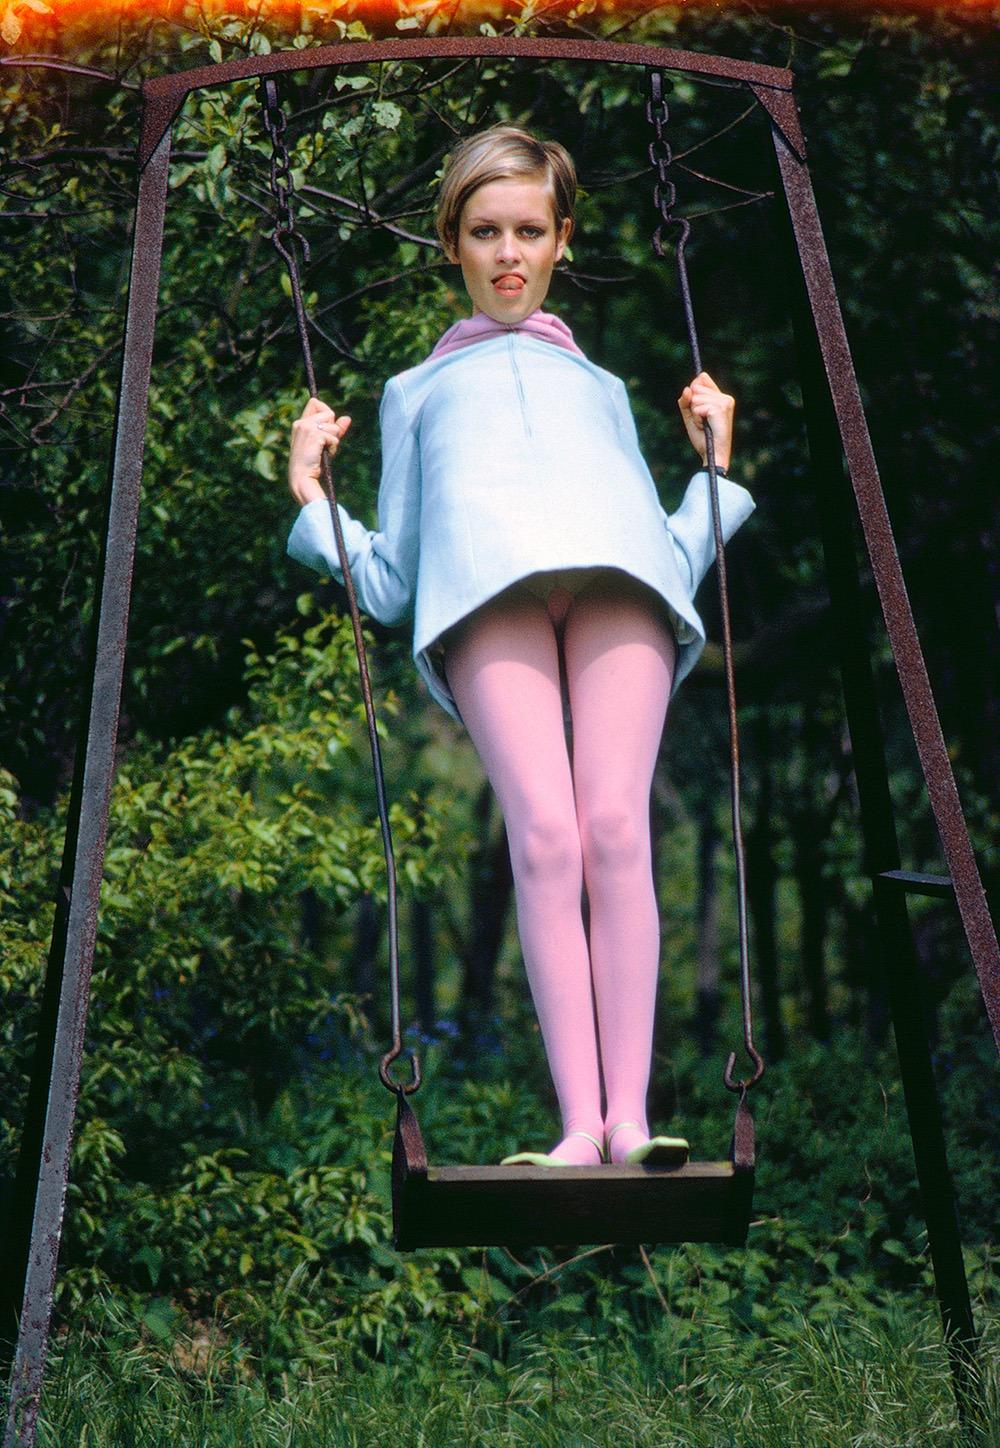 David Steen Color Photograph - Twiggy In Pink Tights On Swing 1967 Limited Estate Print 